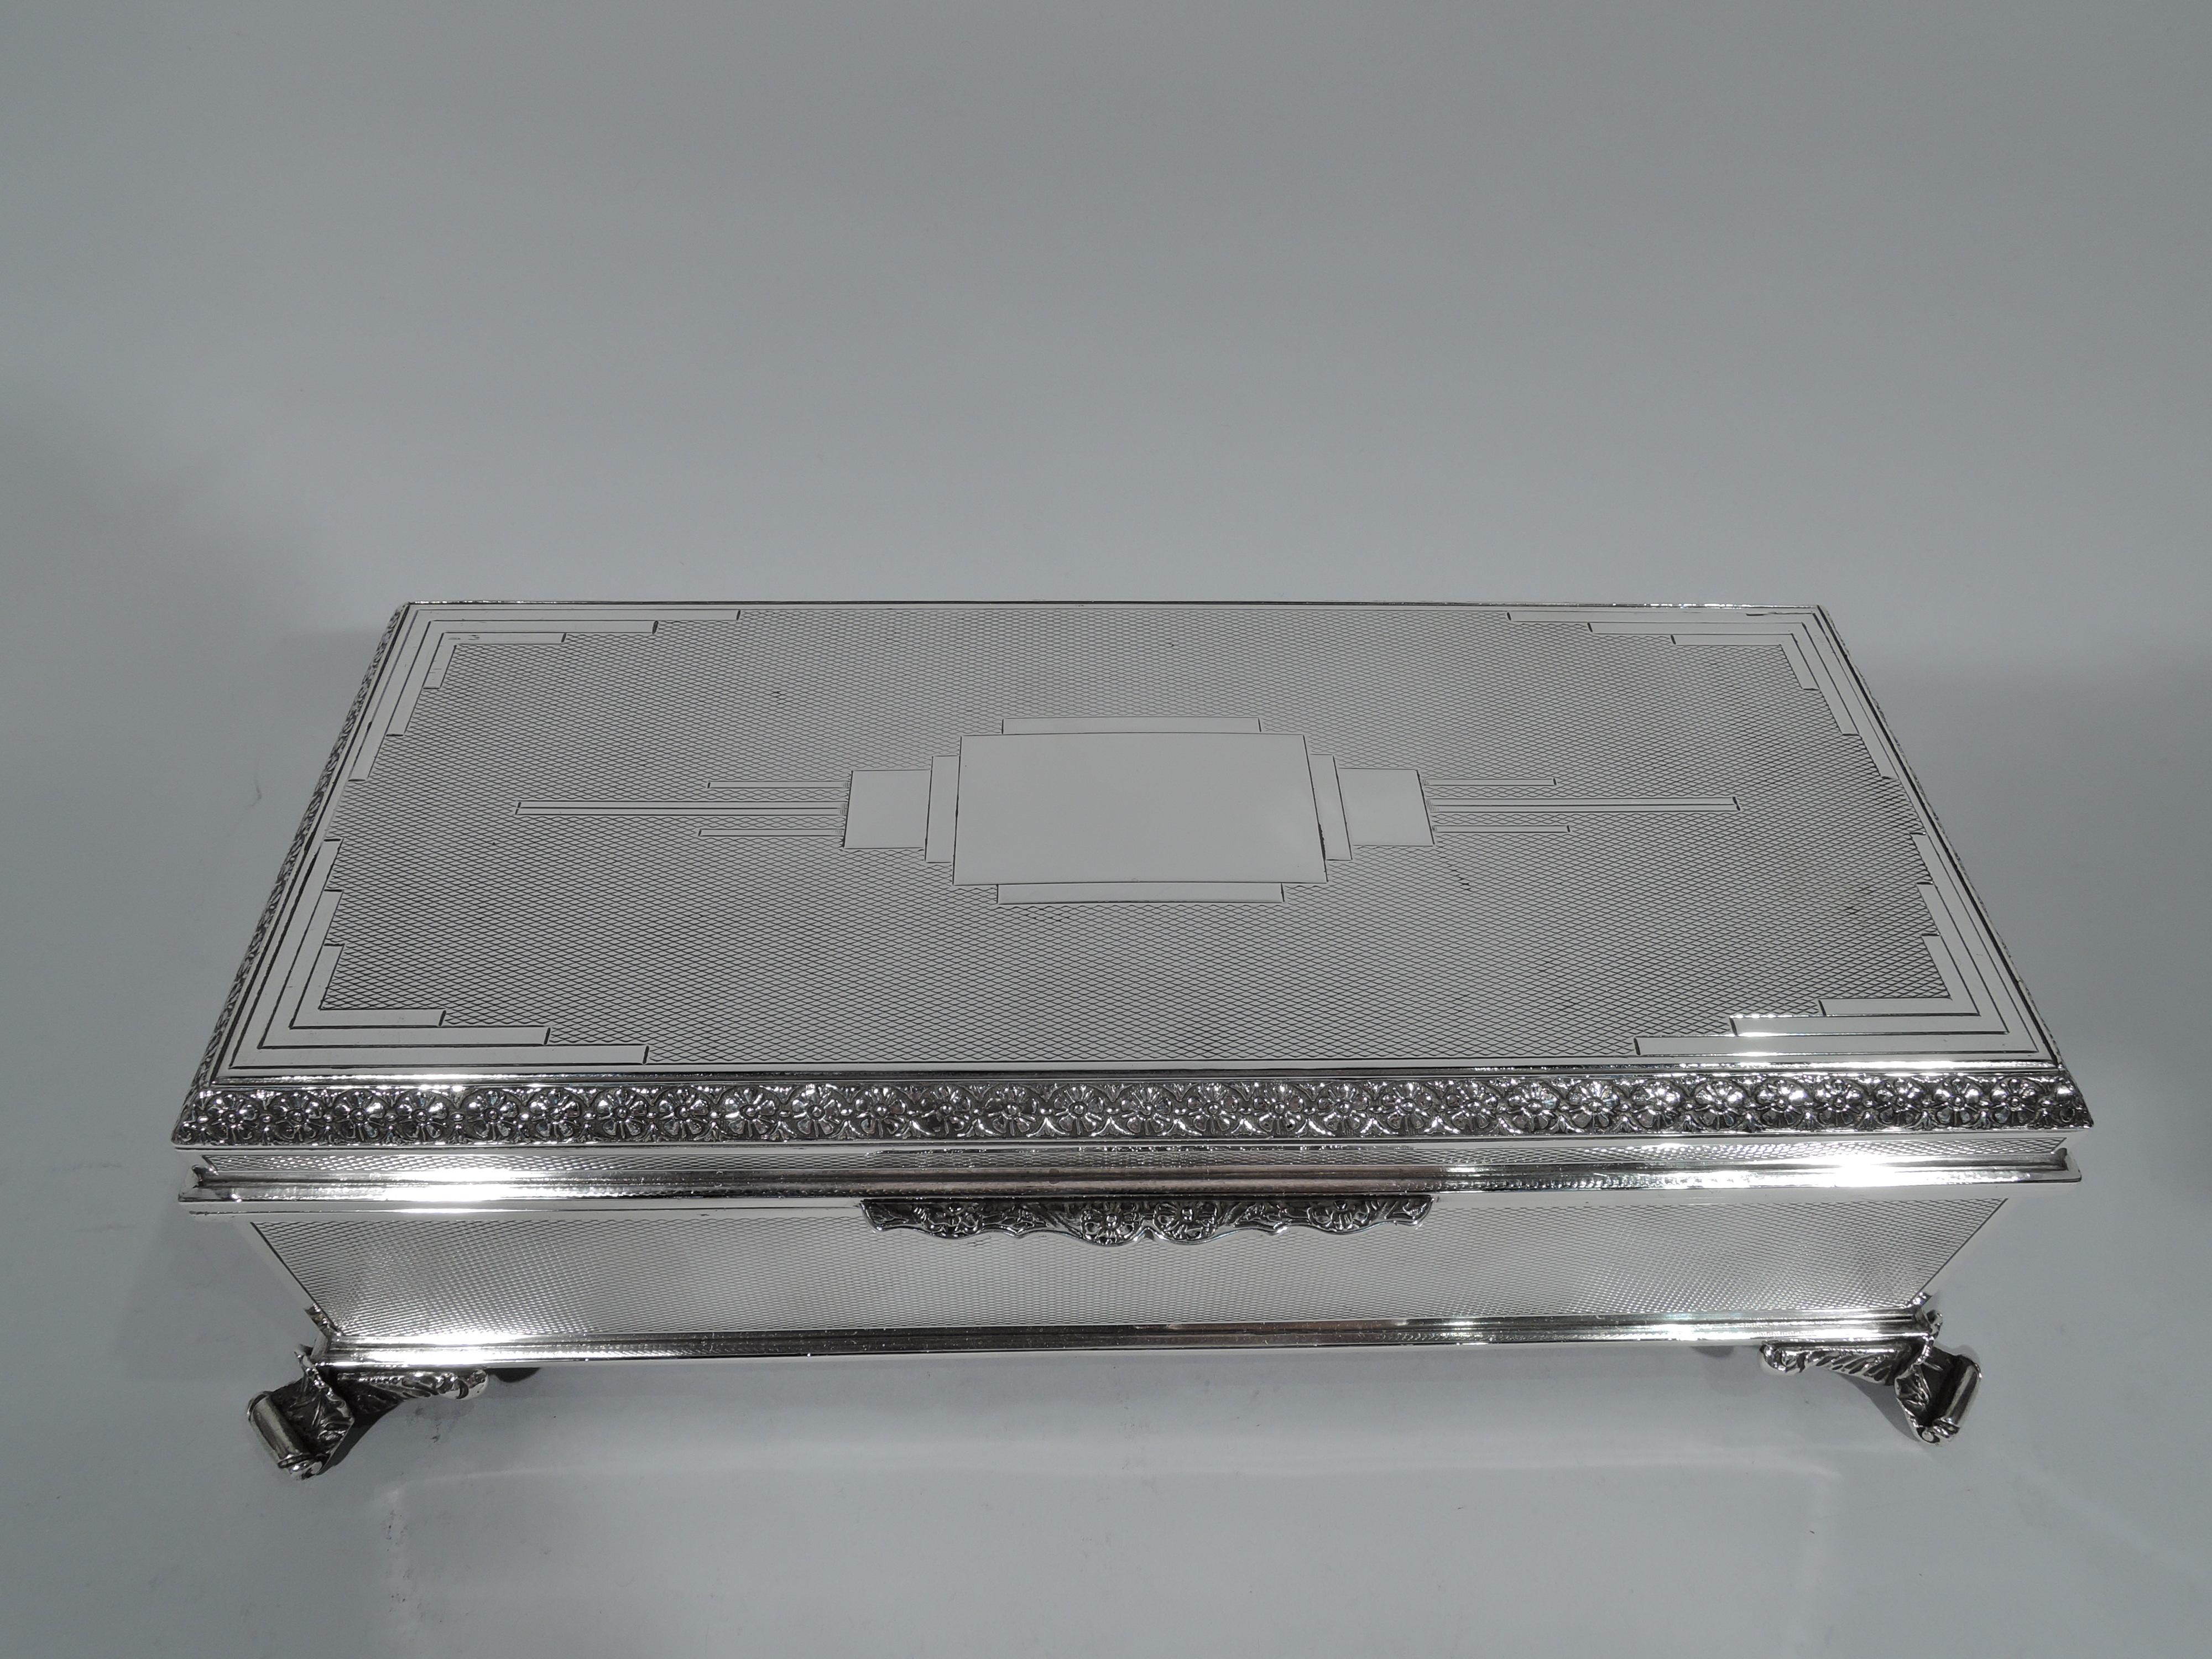 Large and striking Art Deco sterling silver box. Made by AE Poston & Co., Ltd in Birmingham in 1933. Rectangular with straight sides and spread and stylized leaf-mounted volute-scroll corner supports. Cover hinged and raised. Allover engine-turned